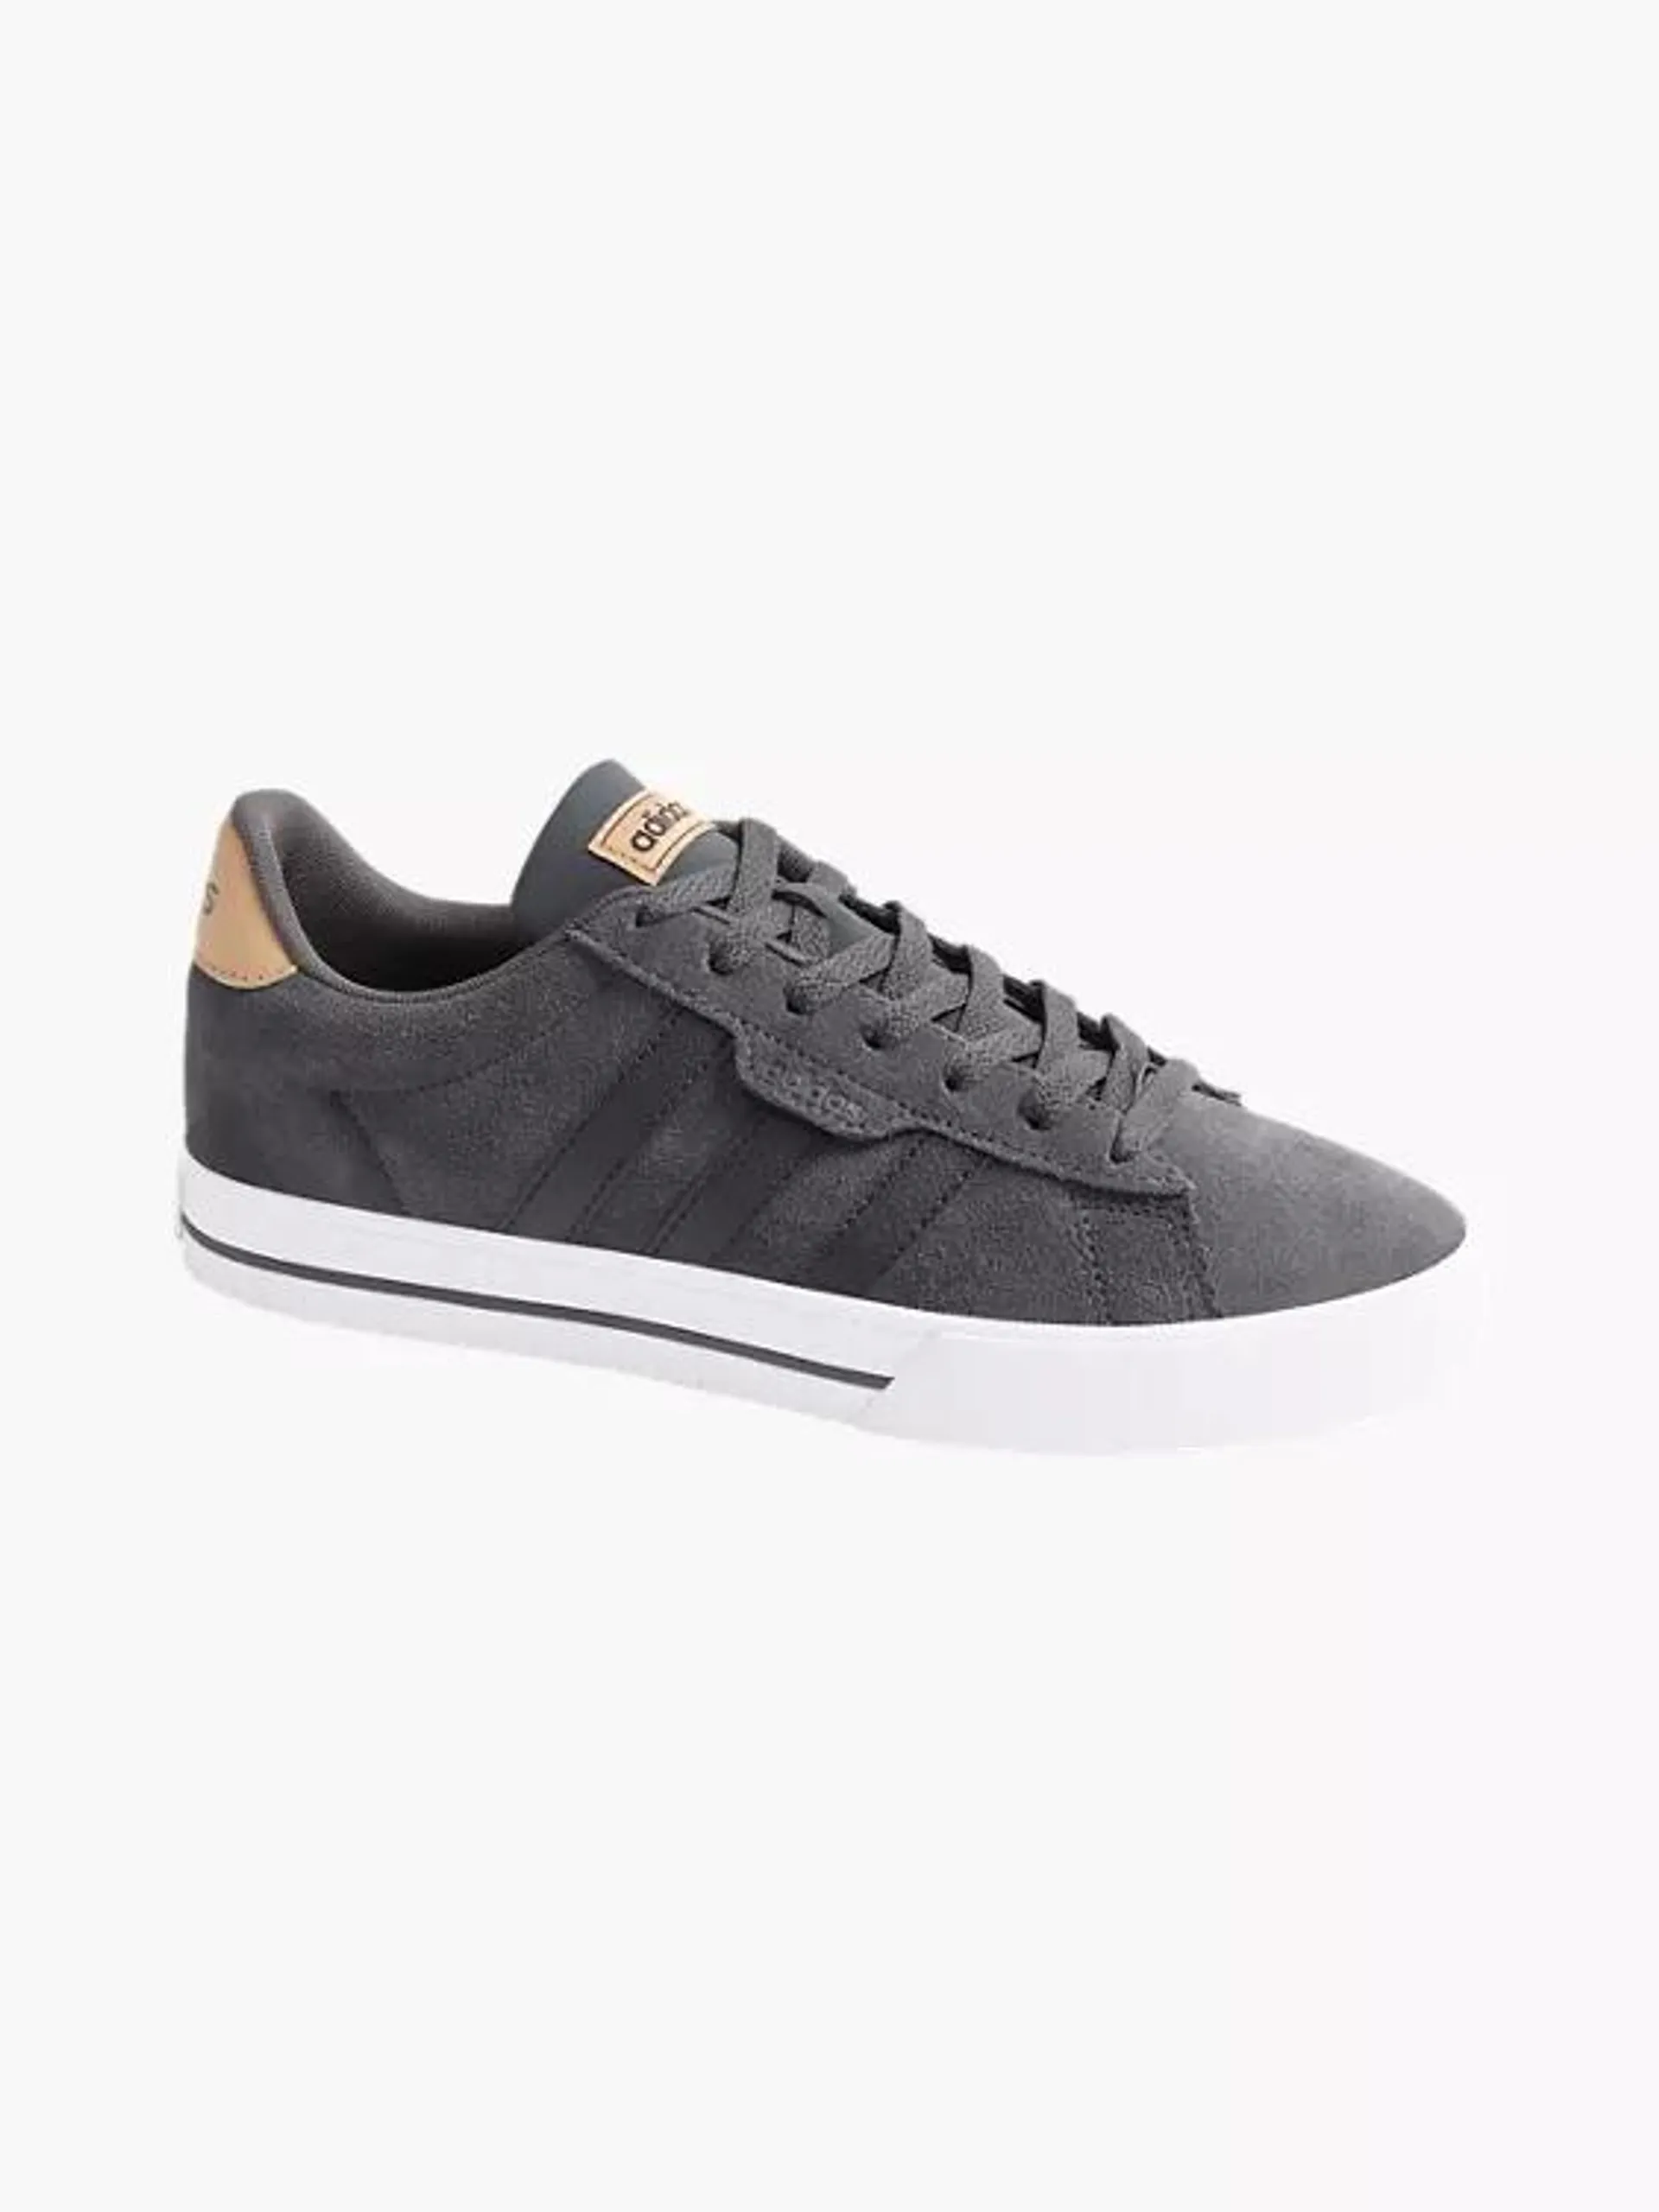 Mens Black Adidas Daily 3.0 Black Lace-up Trainers